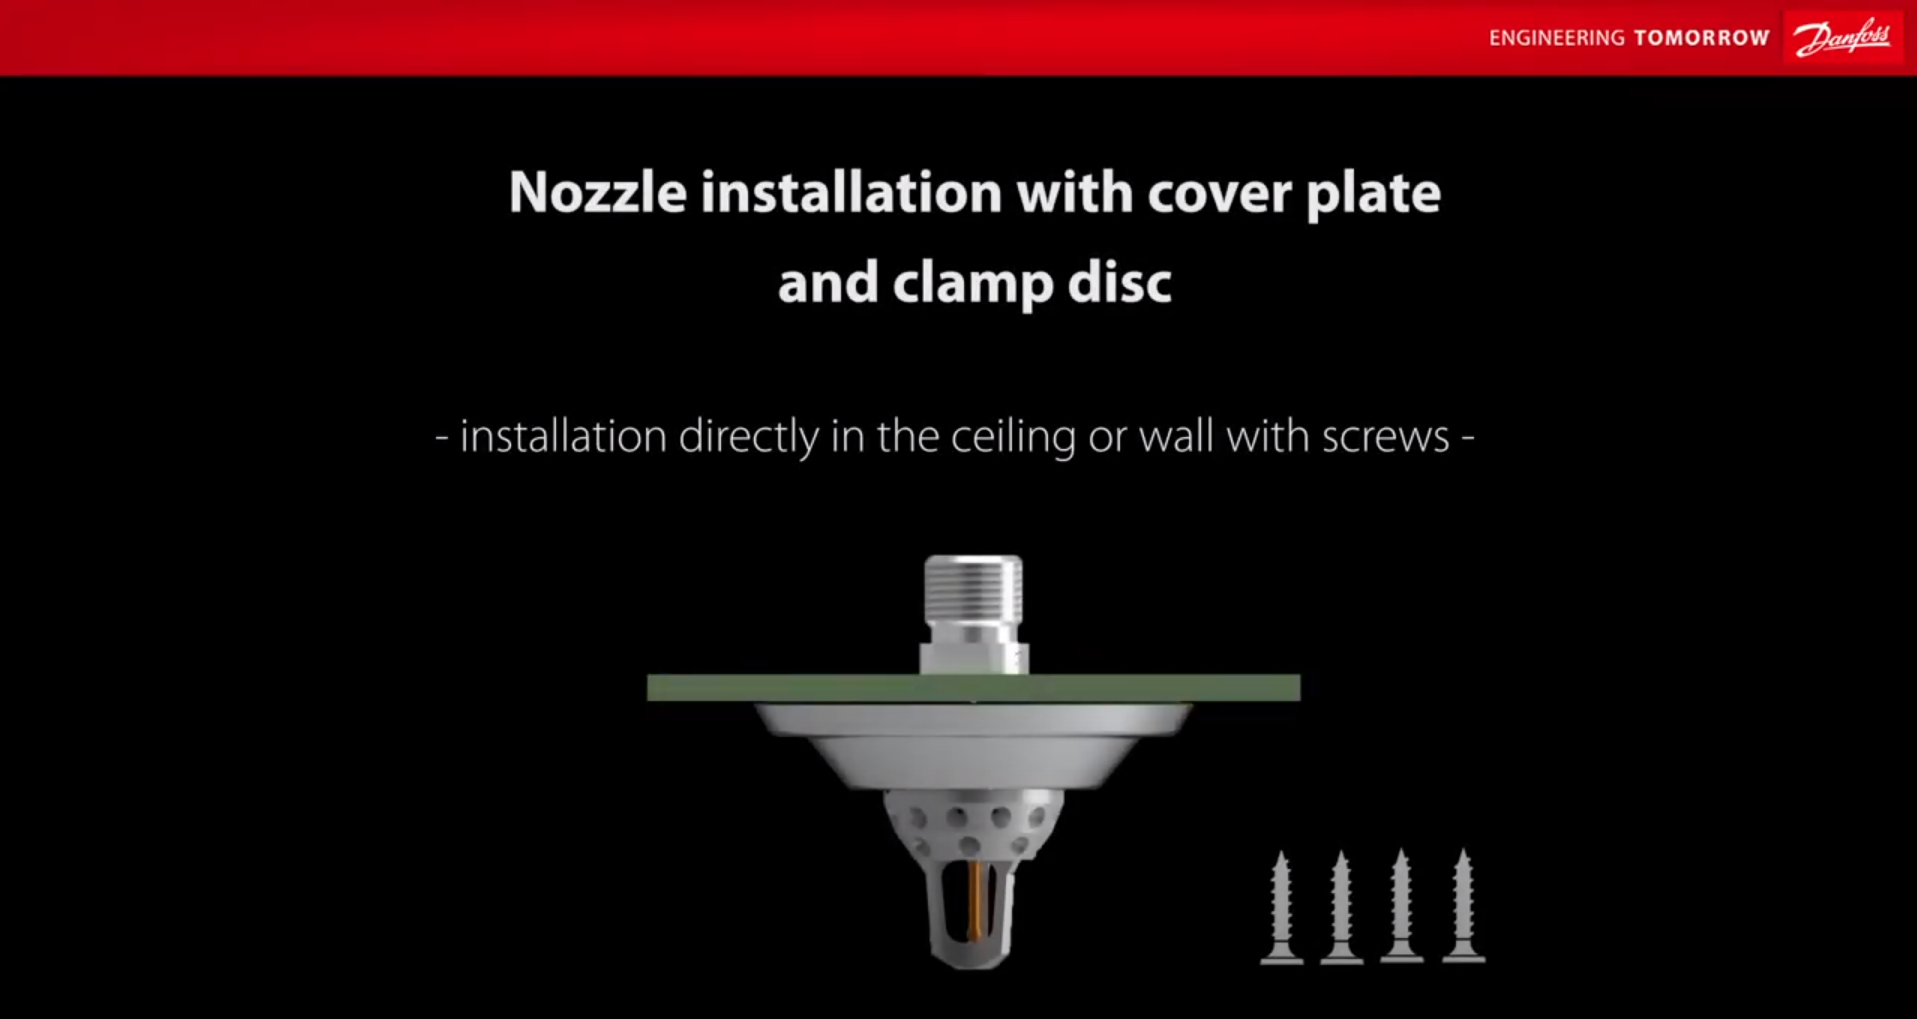 Danfoss Fire Safety | Nozzle installation with cover plate and clamp disc | 2